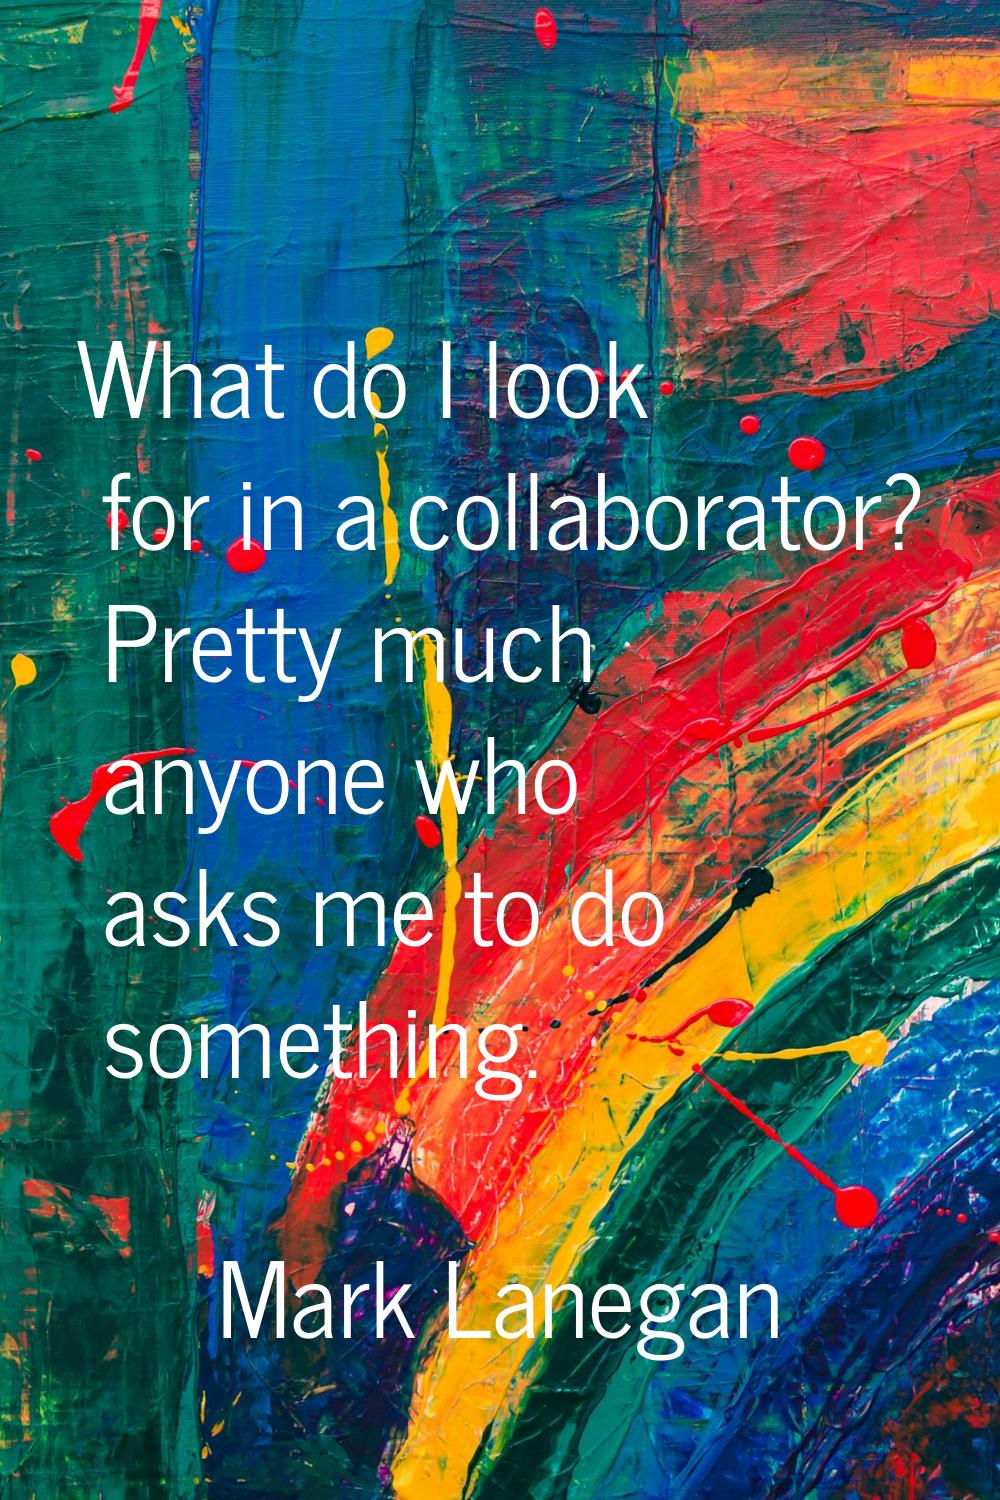 What do I look for in a collaborator? Pretty much anyone who asks me to do something.